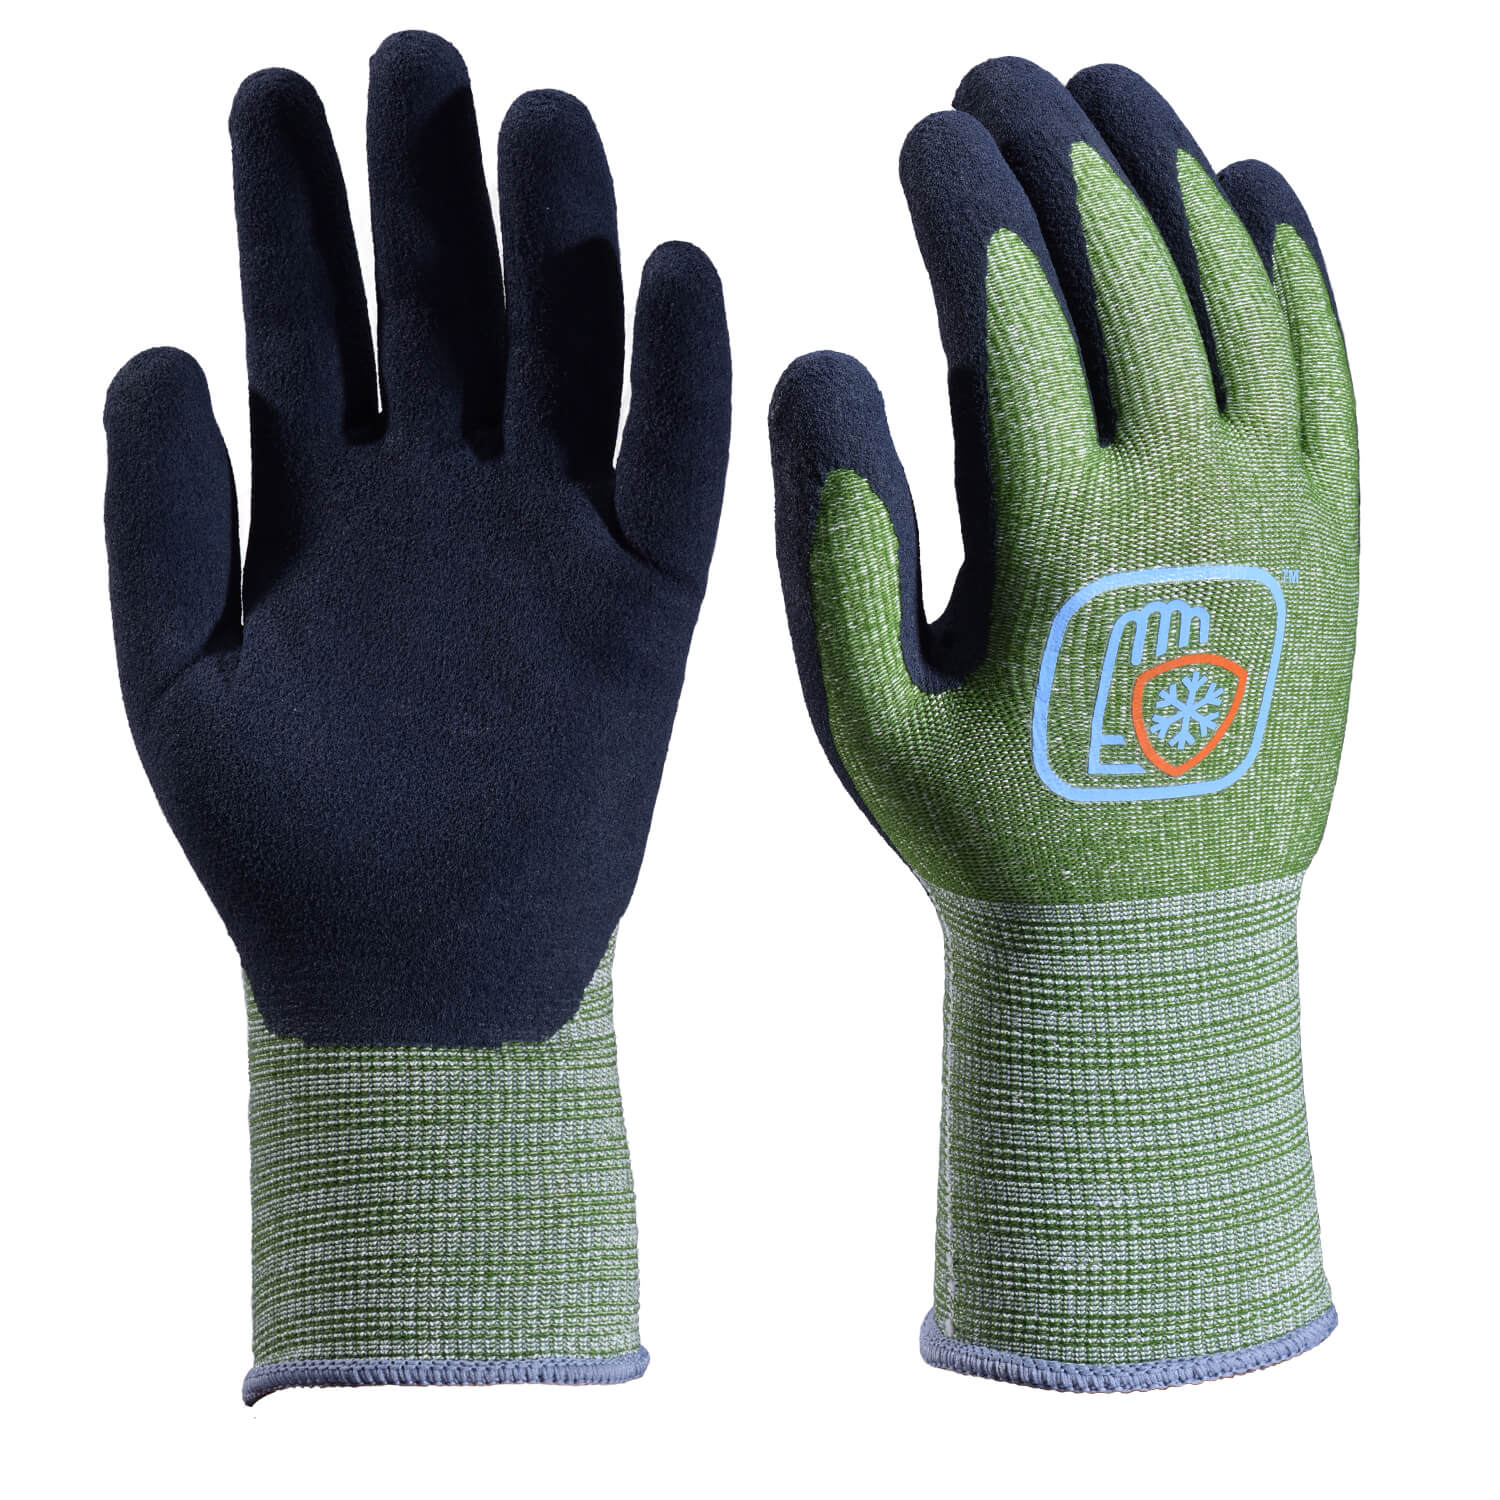 SAFEYEAR Safety Work Gloves, Latex Coated Safety Gloves for Gardening and Builders